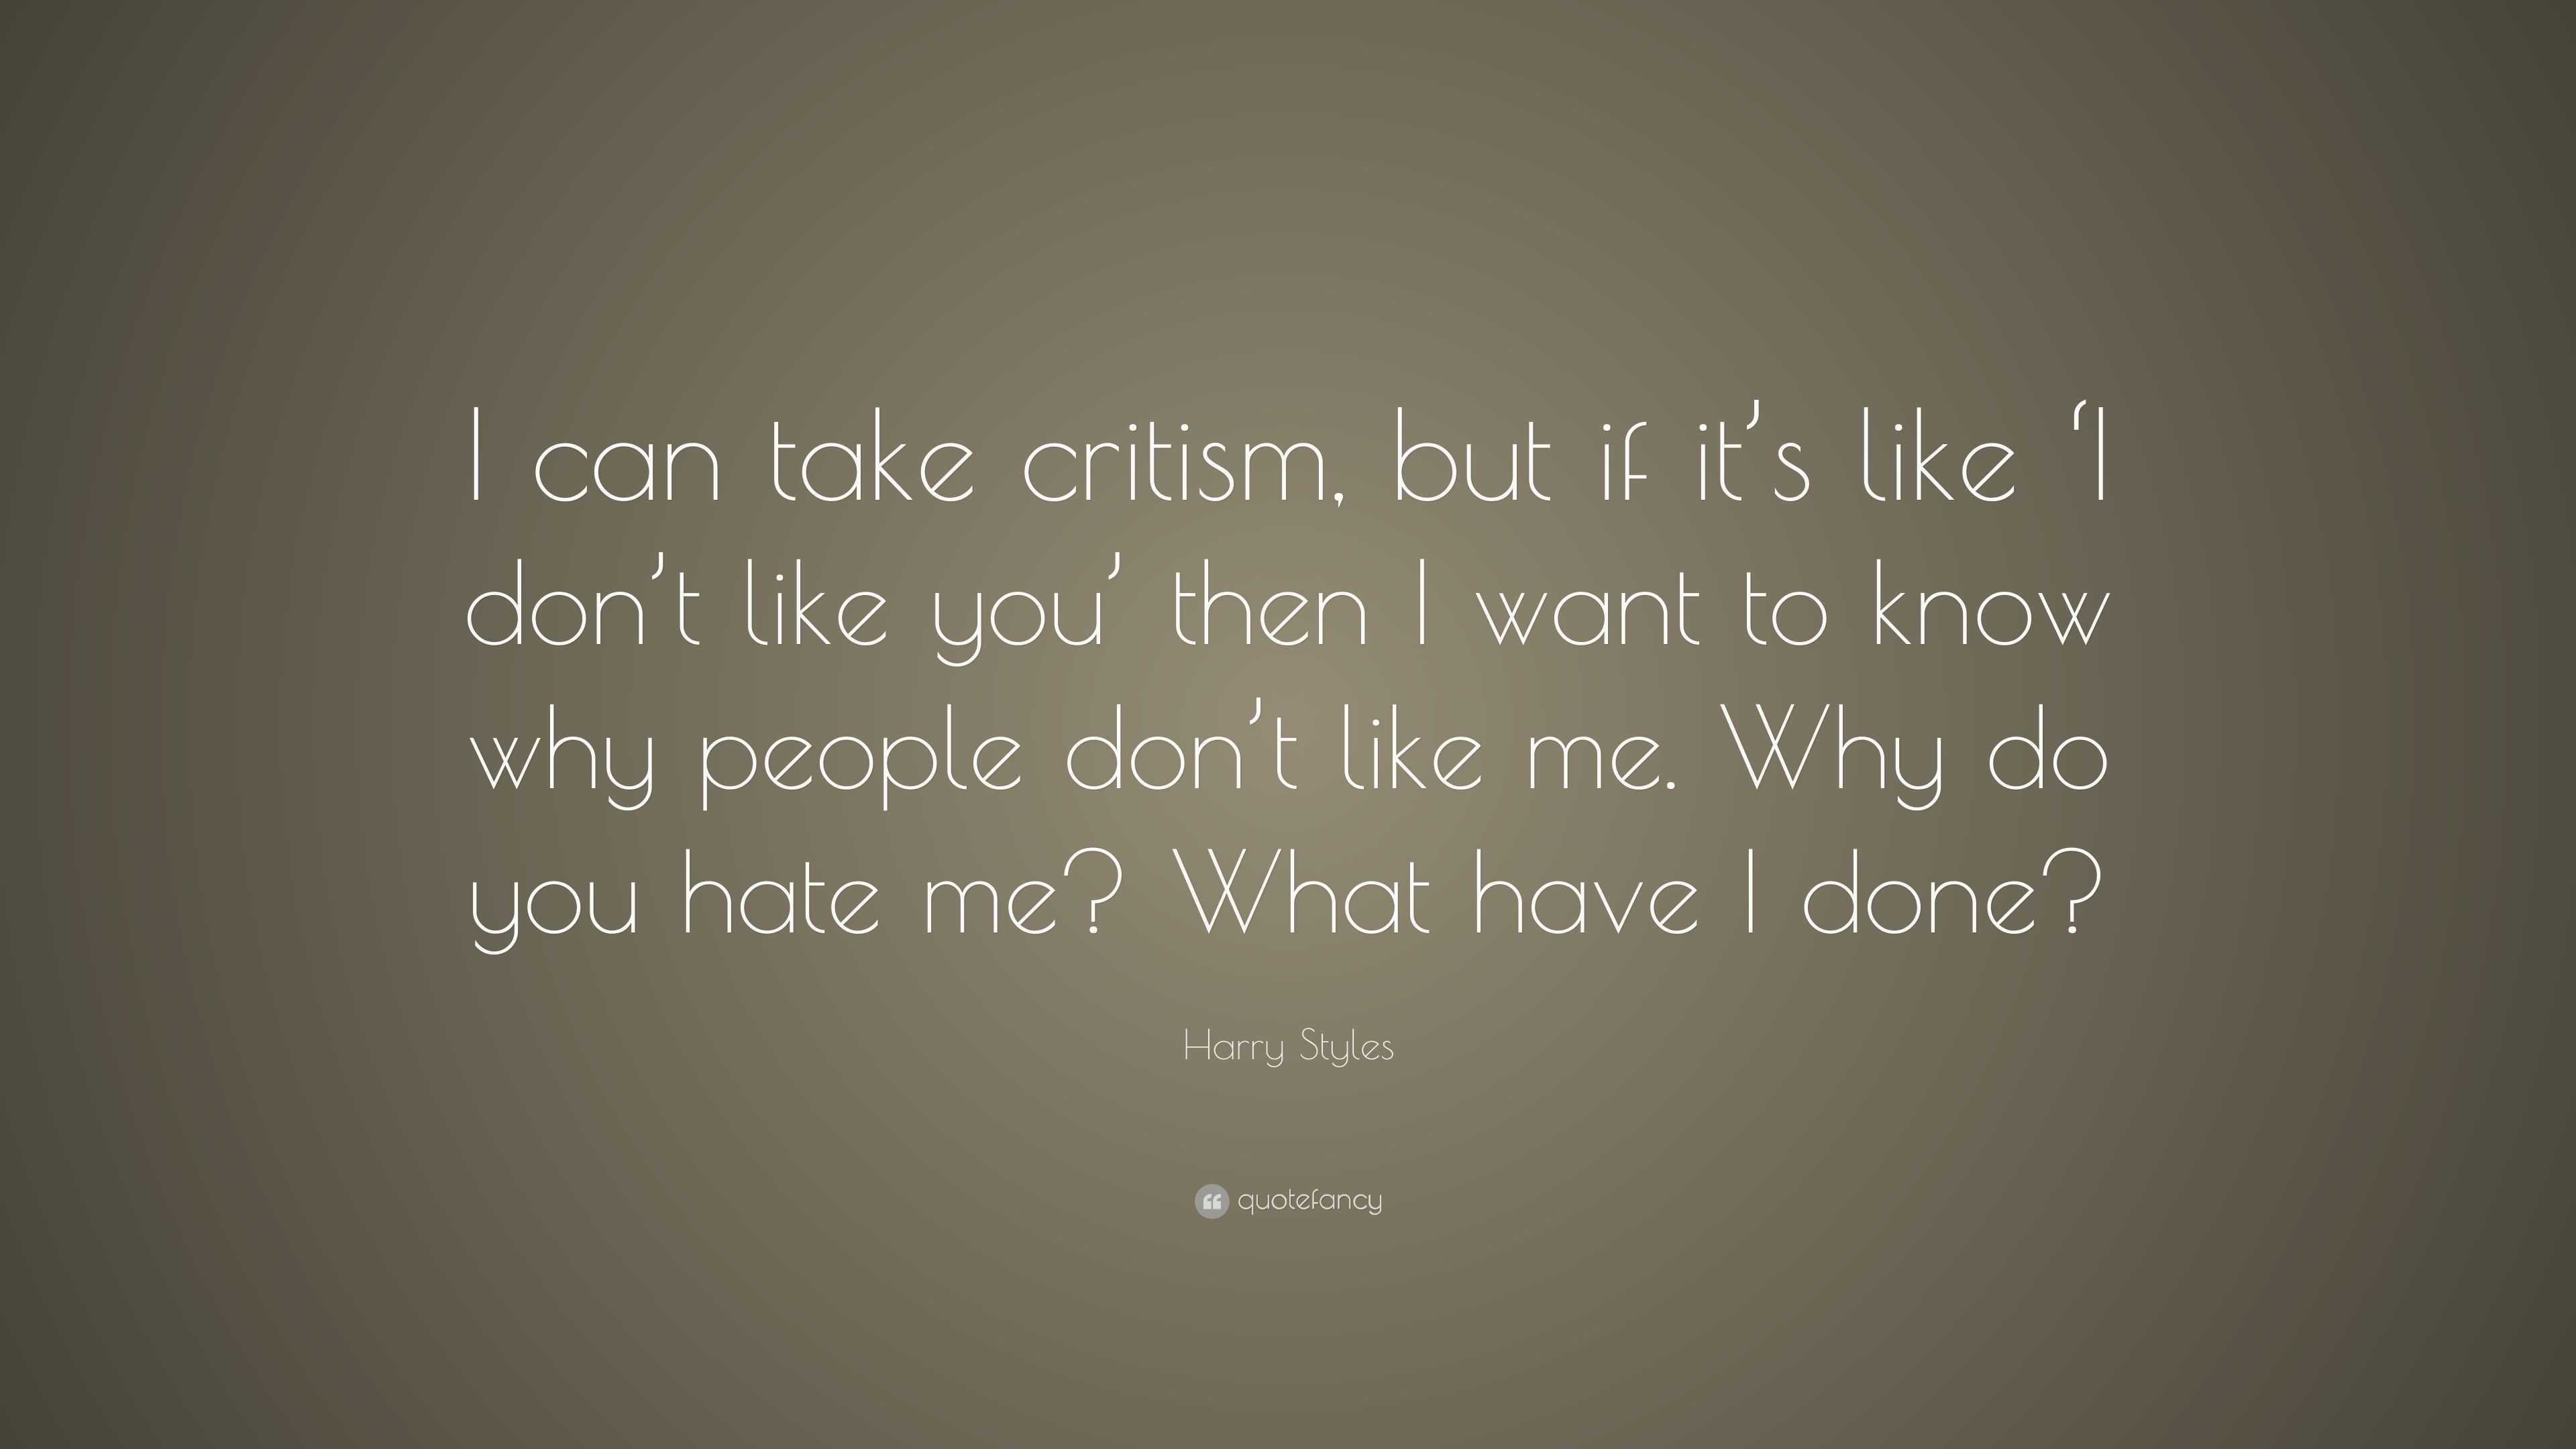 Harry Styles Quote “i Can Take Critism But If Its Like ‘i Dont Like